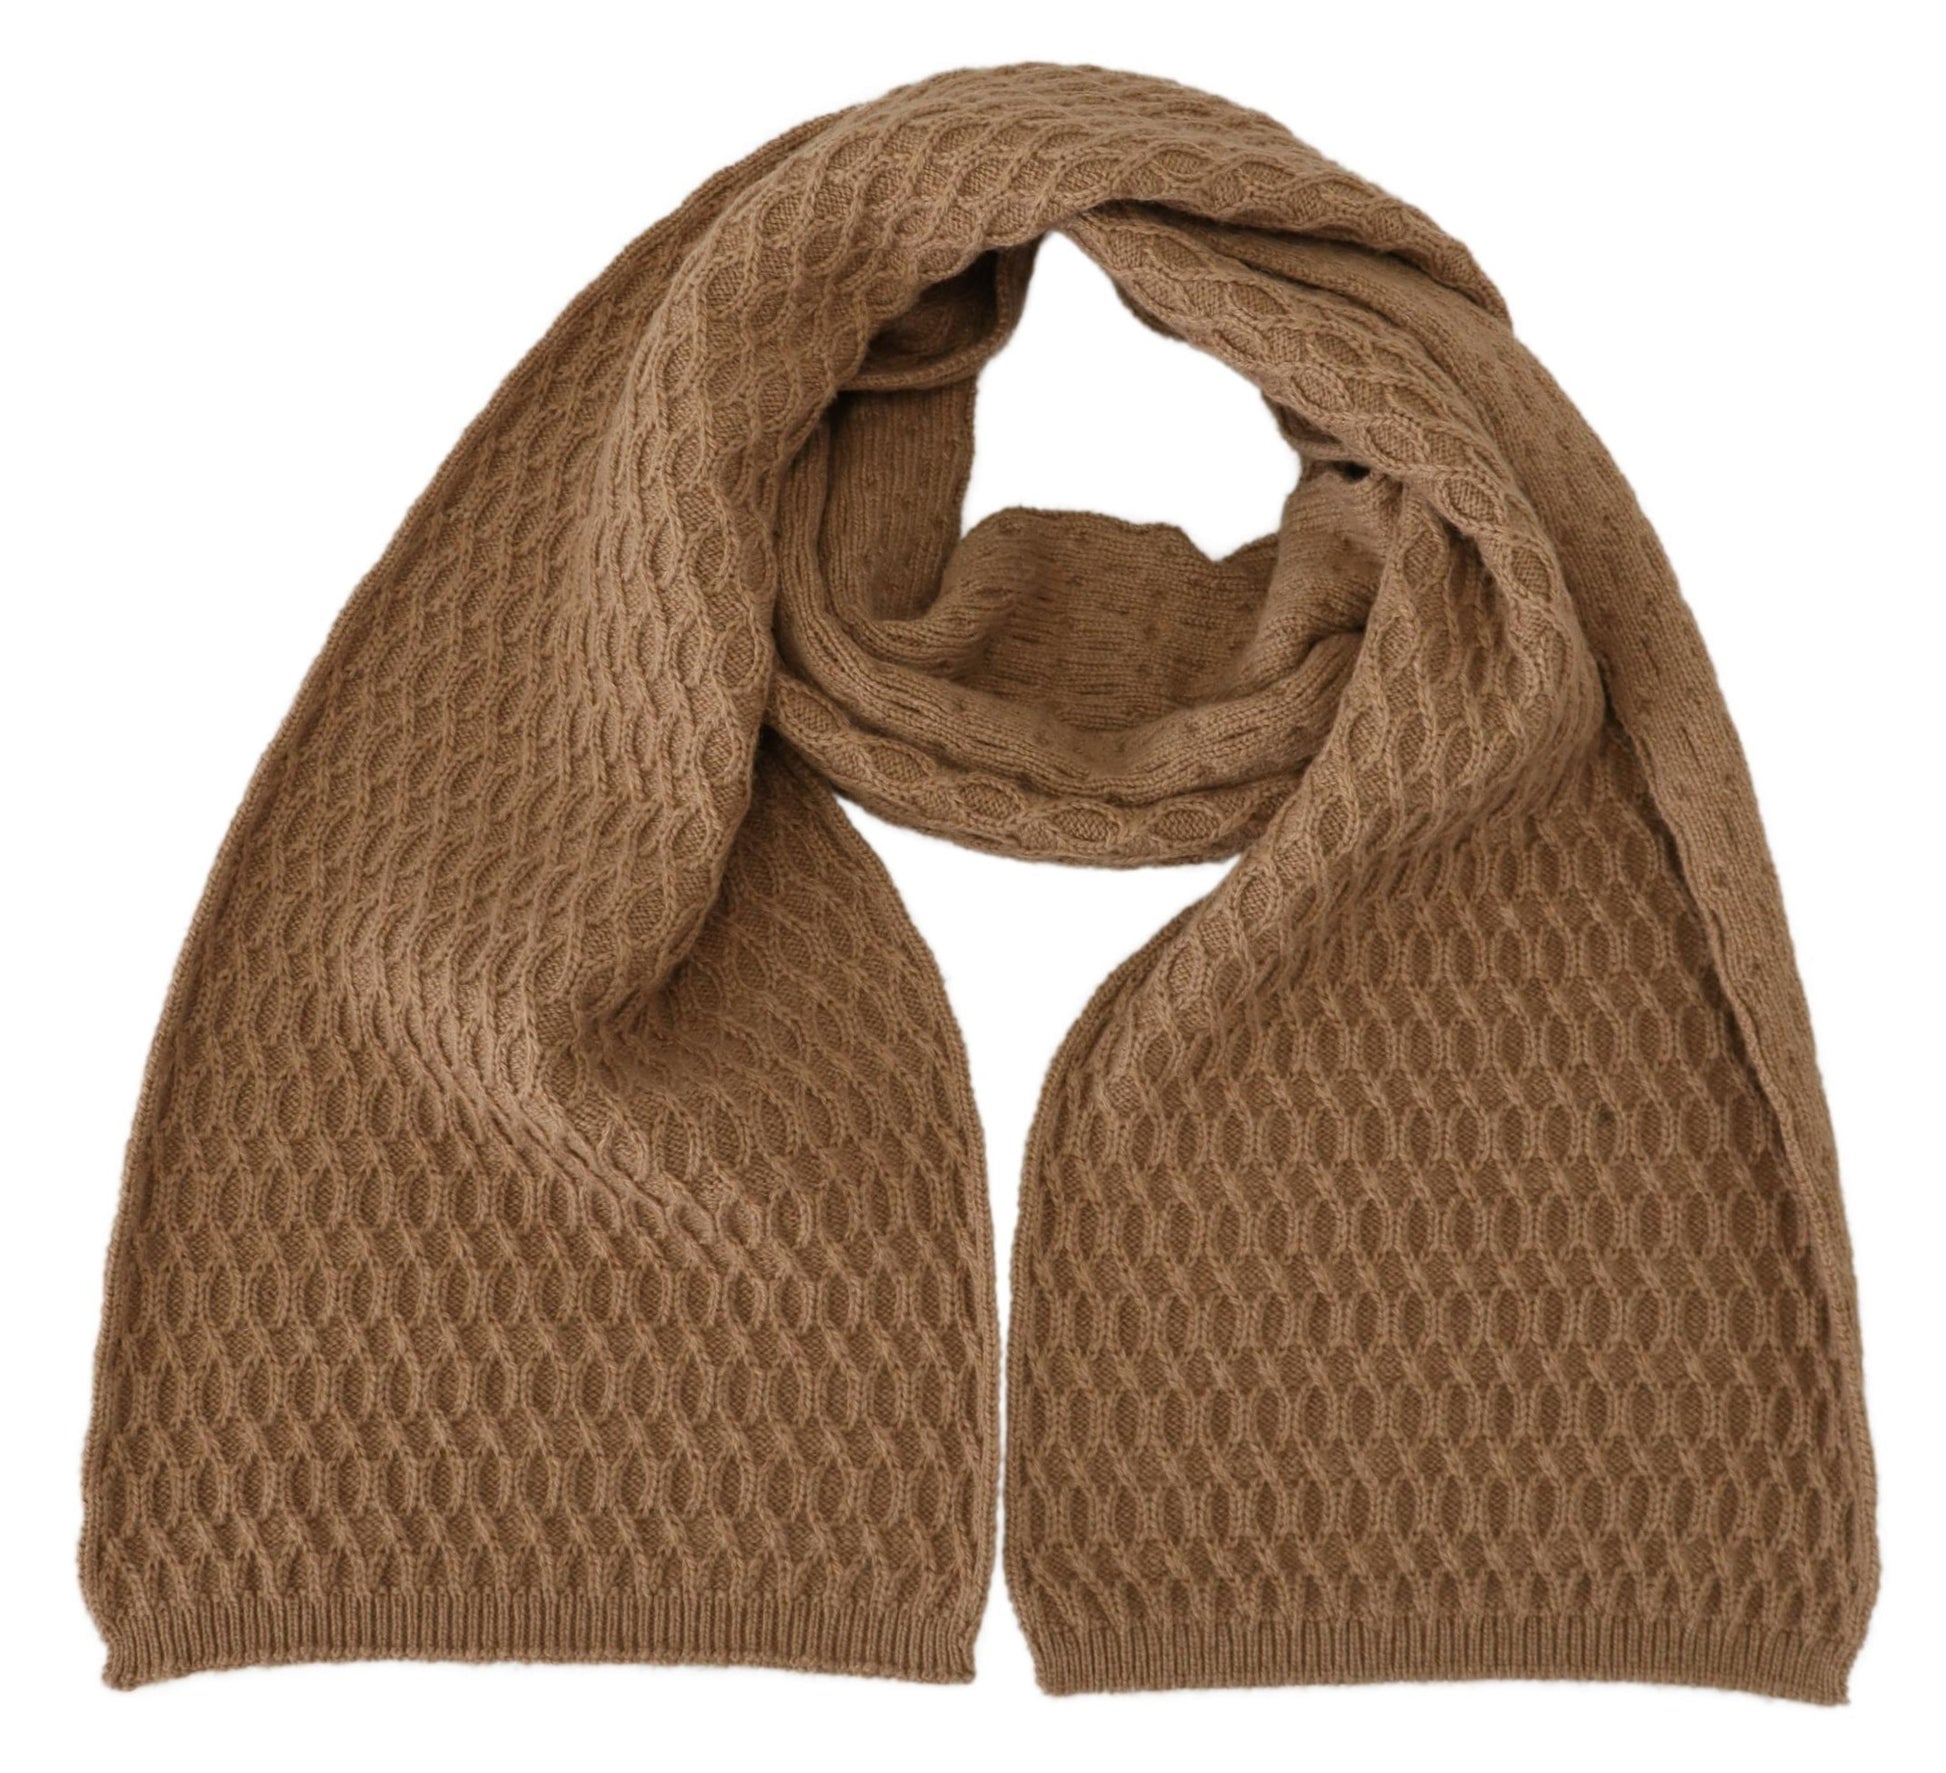 Dolce & Gabbana Dark Brown Wrap Shawl Knitted Camel Scarf - Designed by Dolce & Gabbana Available to Buy at a Discounted Price on Moon Behind The Hill Online Designer Discount Store